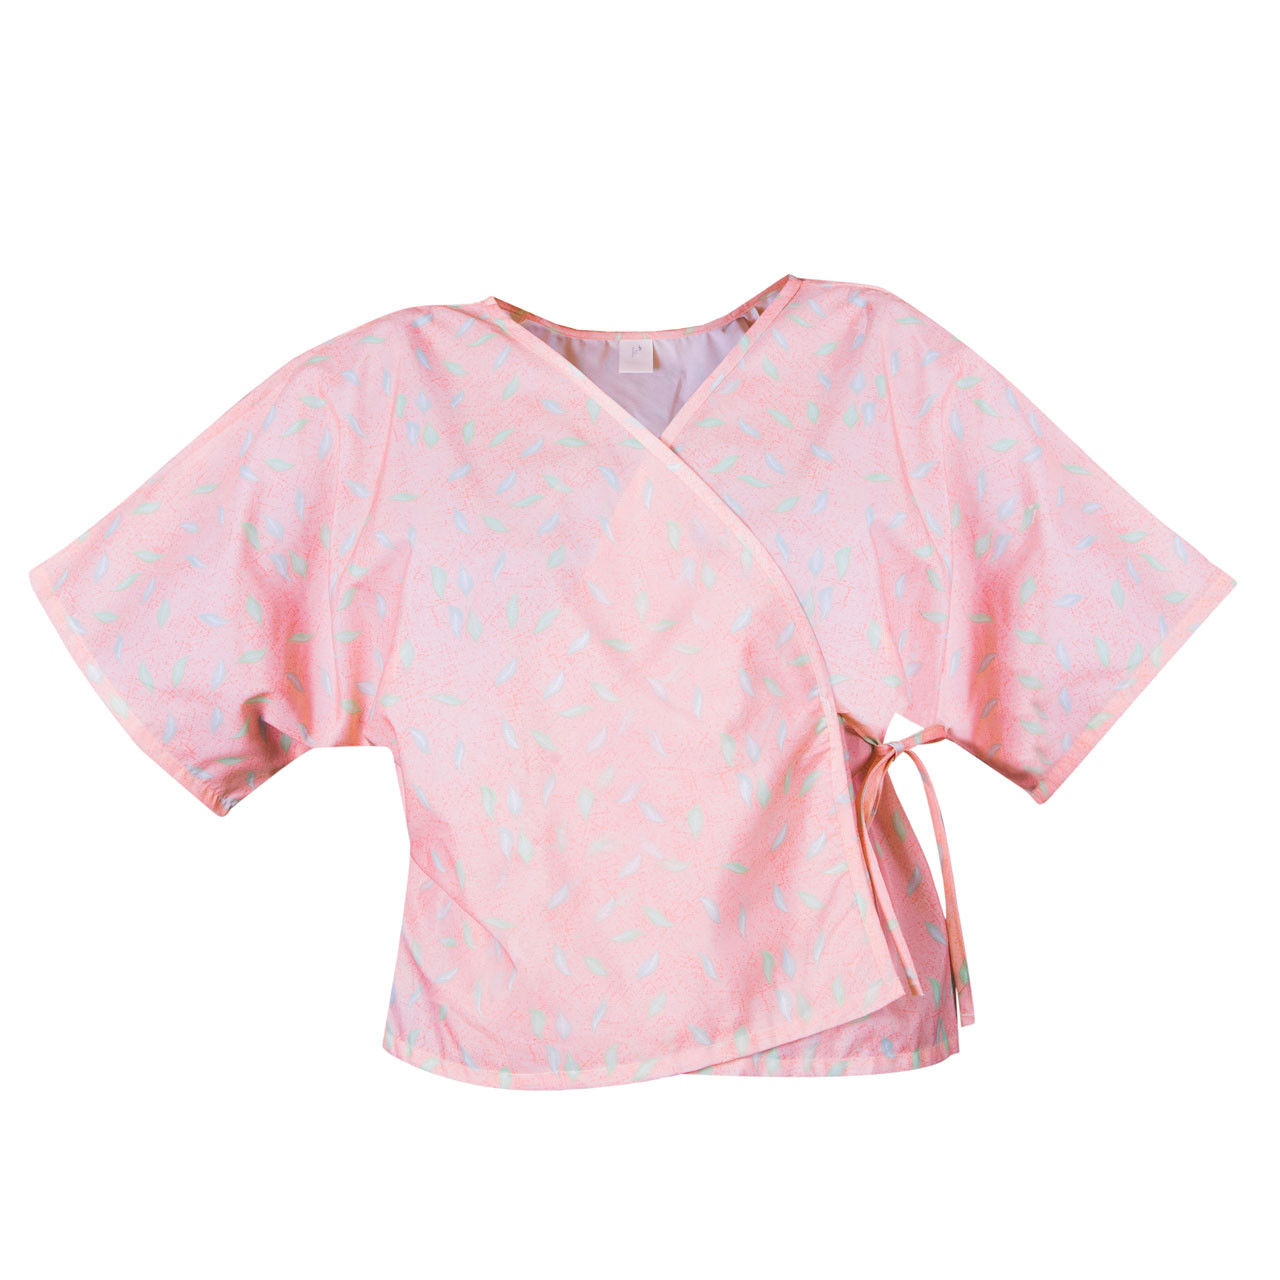 What are the materials used in the making of mammography capes by American Dawn?